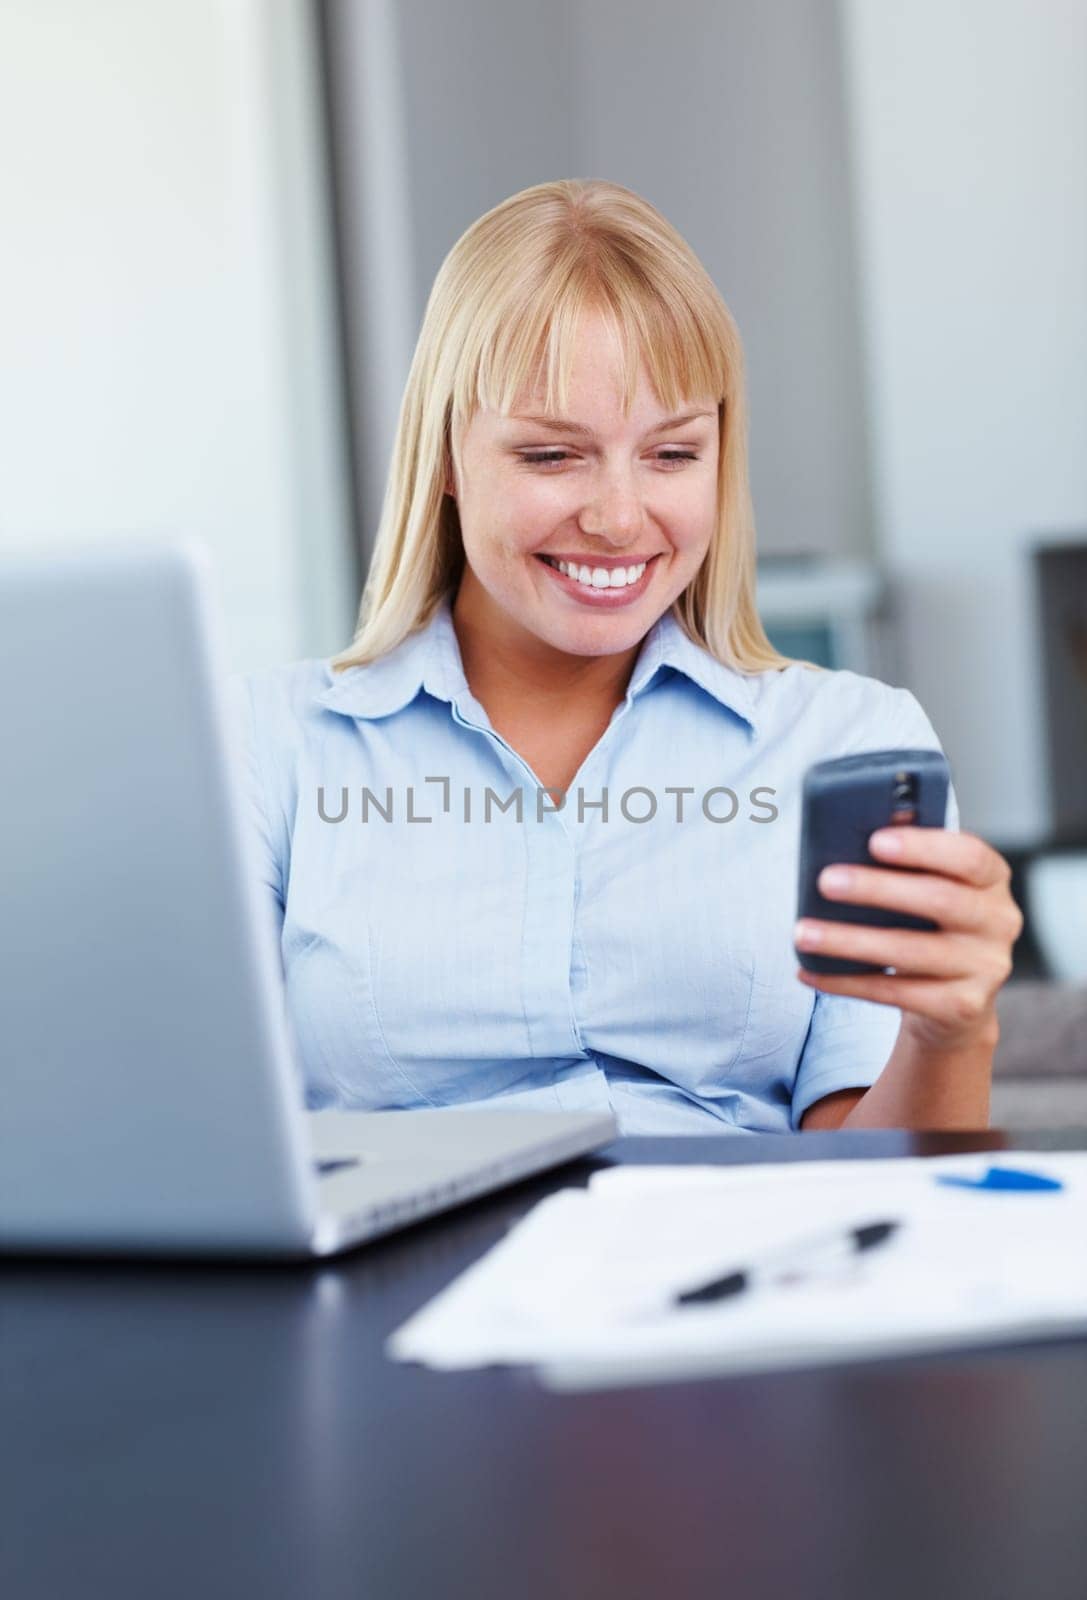 Business, woman and phone with typing or happy for text message, networking or internet chat in office. Entrepreneur, person and smartphone or smile with texting, communication and email at workplace.